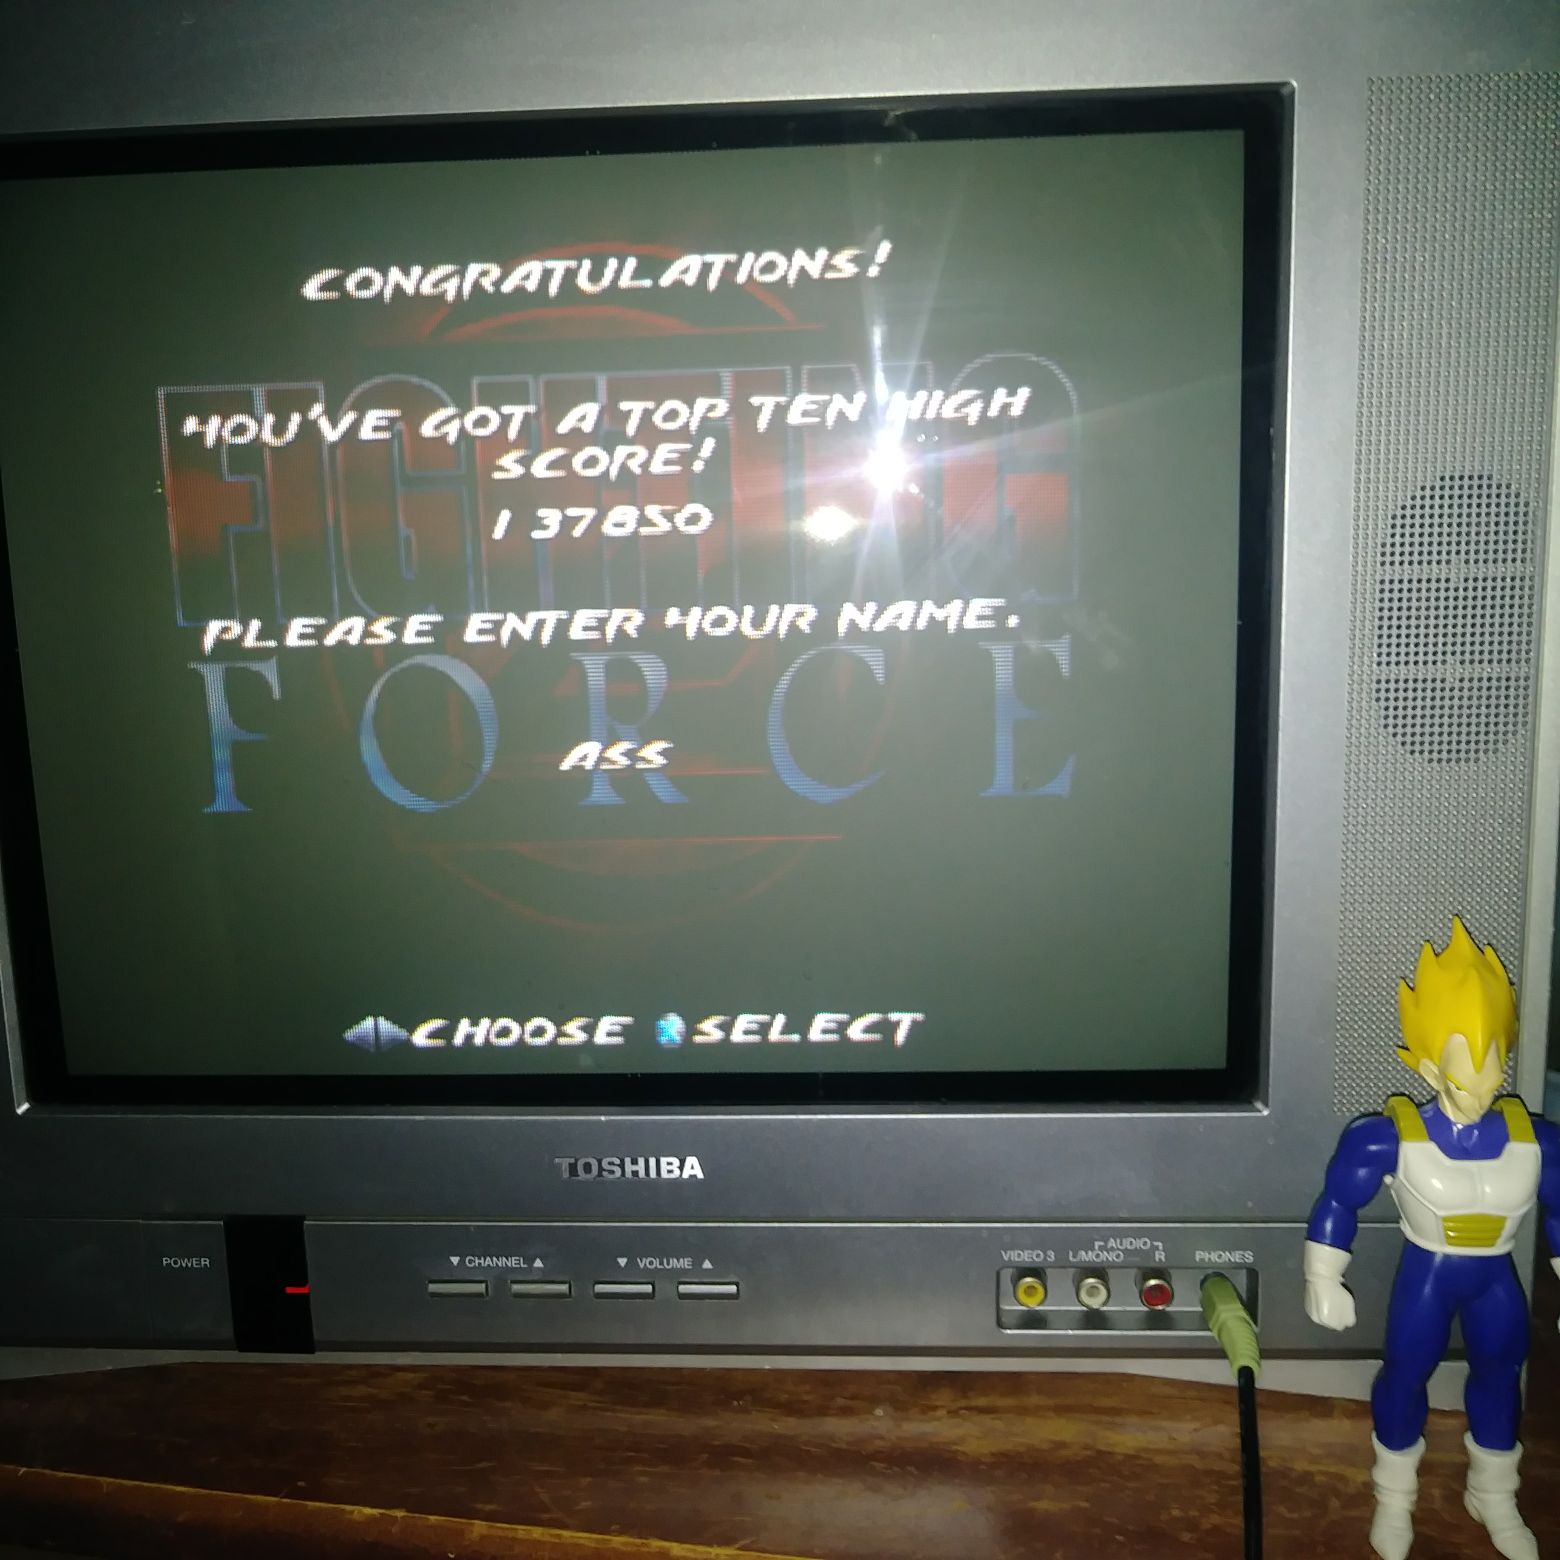 umbra: Fighting Force [Normal] (Playstation 1 Emulated) 137,850 points on 2022-05-25 16:26:58